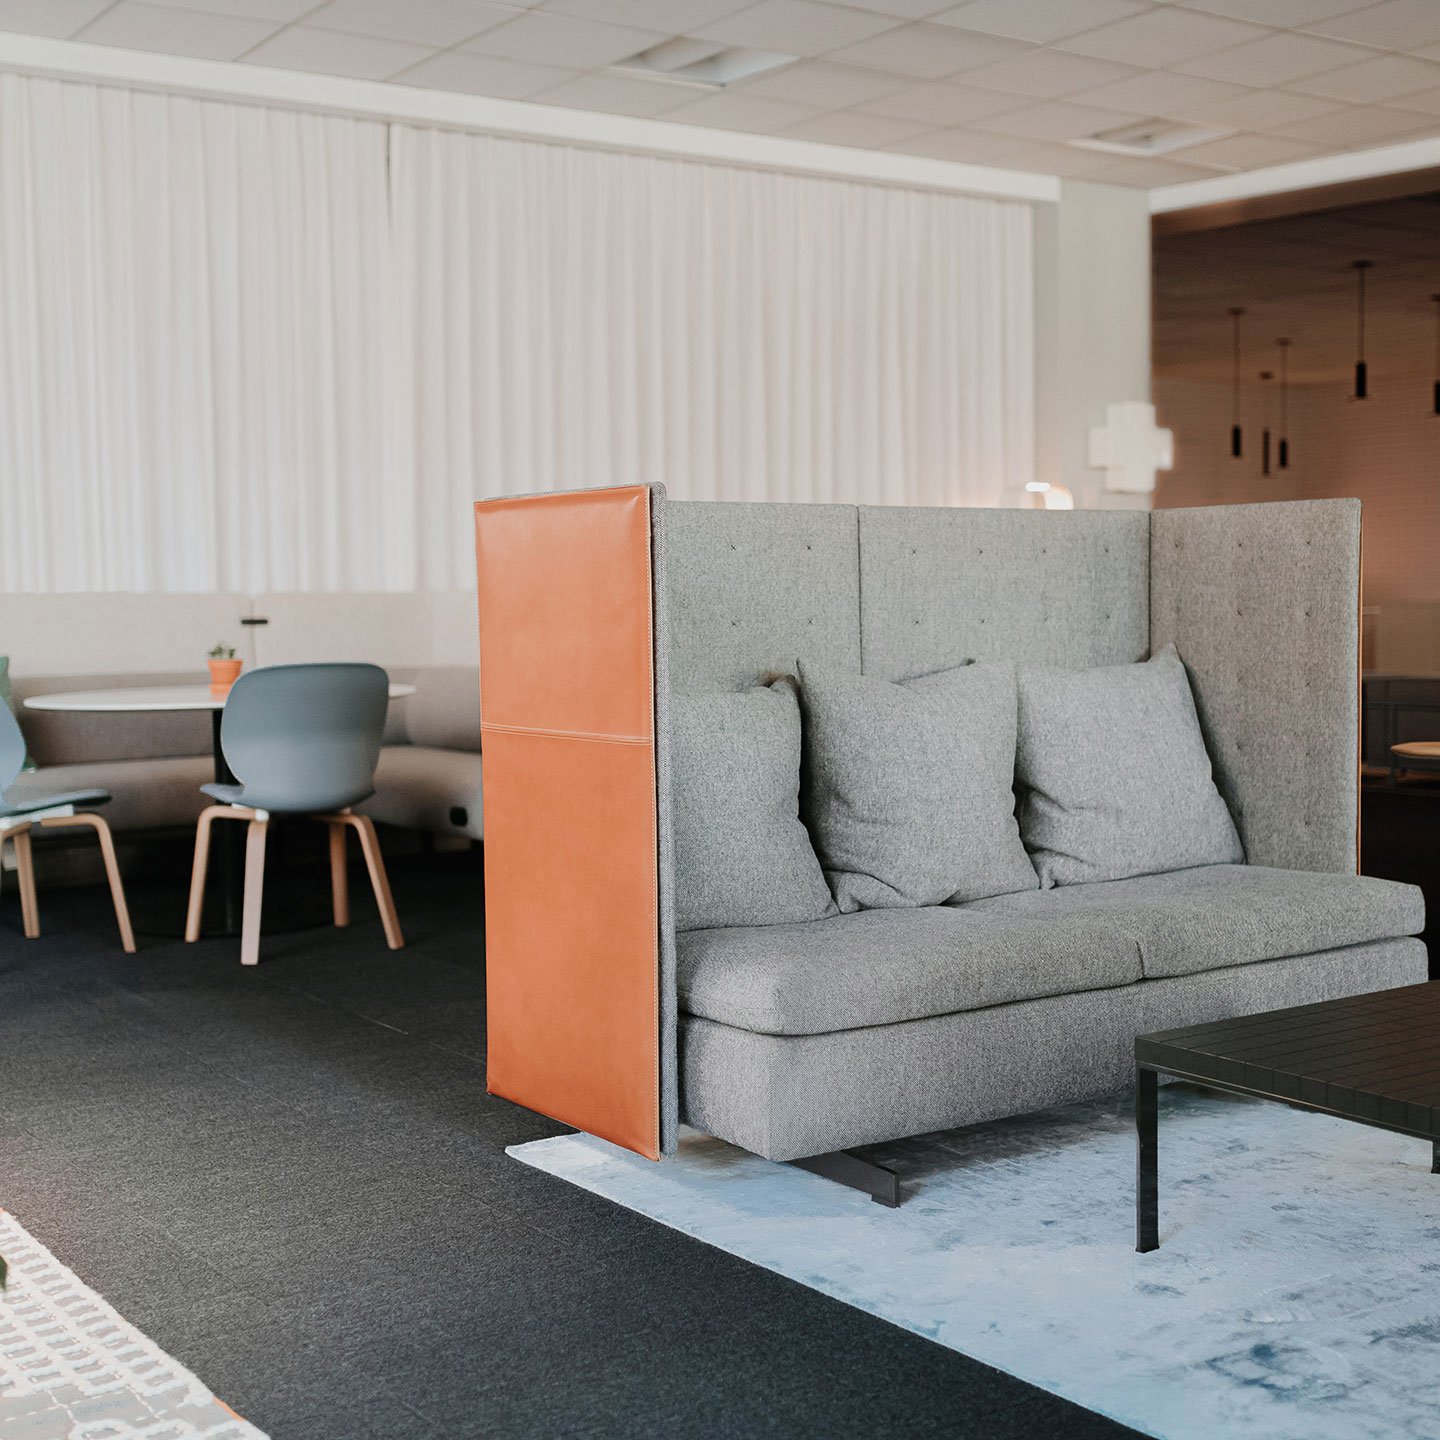 Haworth GranTorino HB Booth in grey color and orange back in open office lounge area